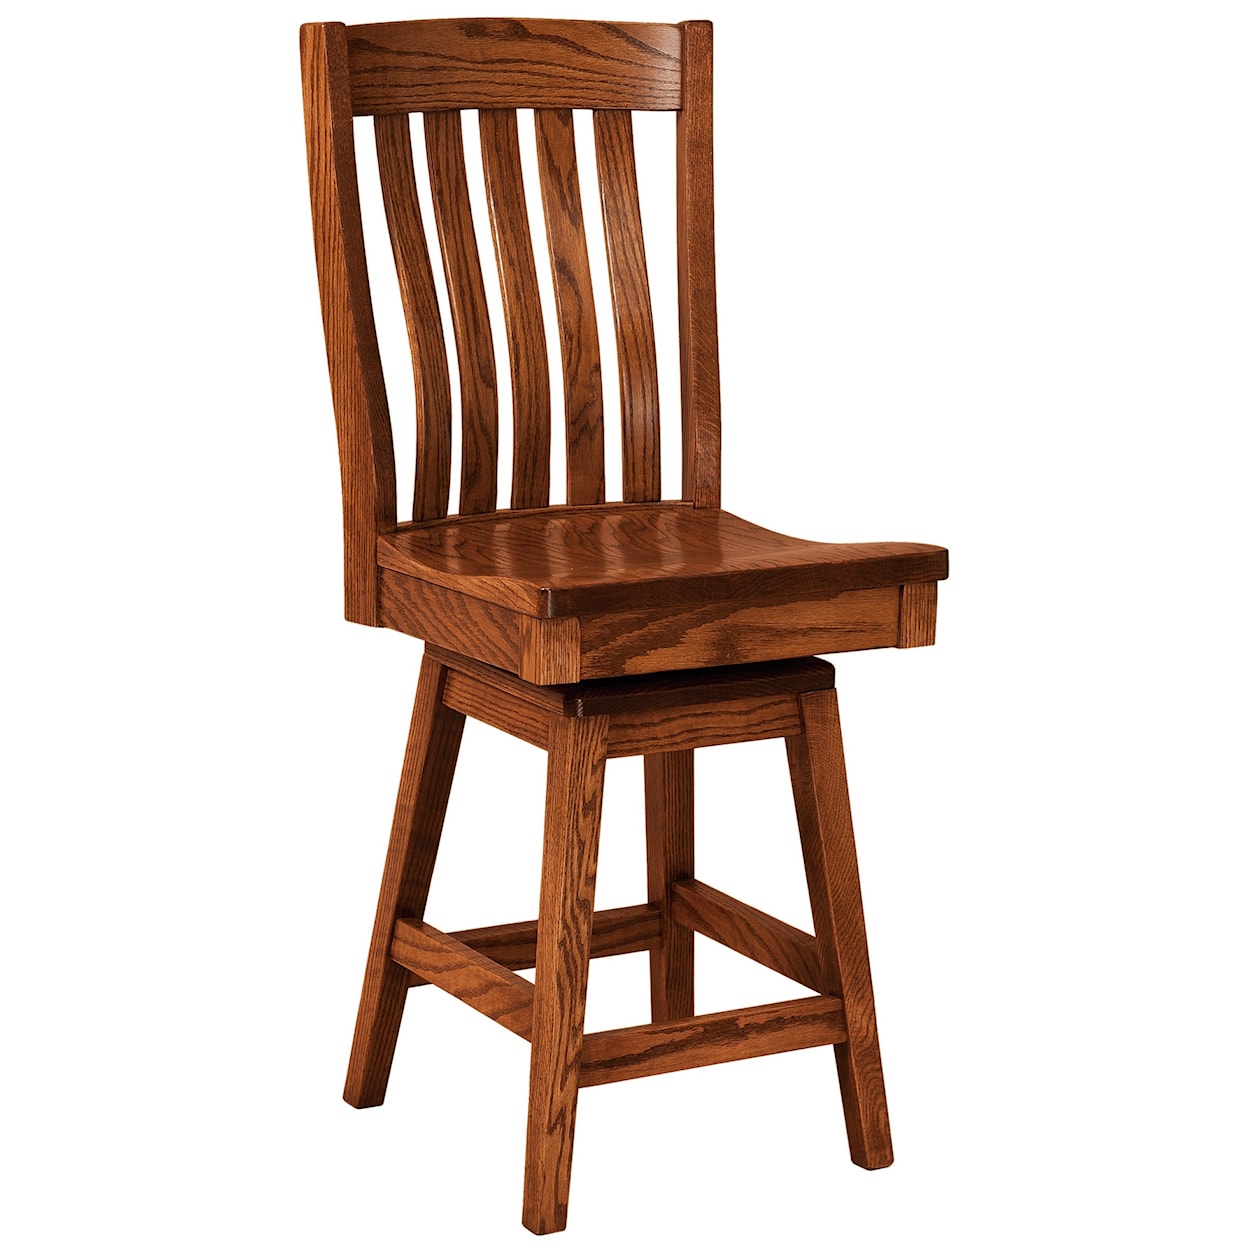 F&N Woodworking Houghton Swivel Counter Height Stool - Fabric Seat